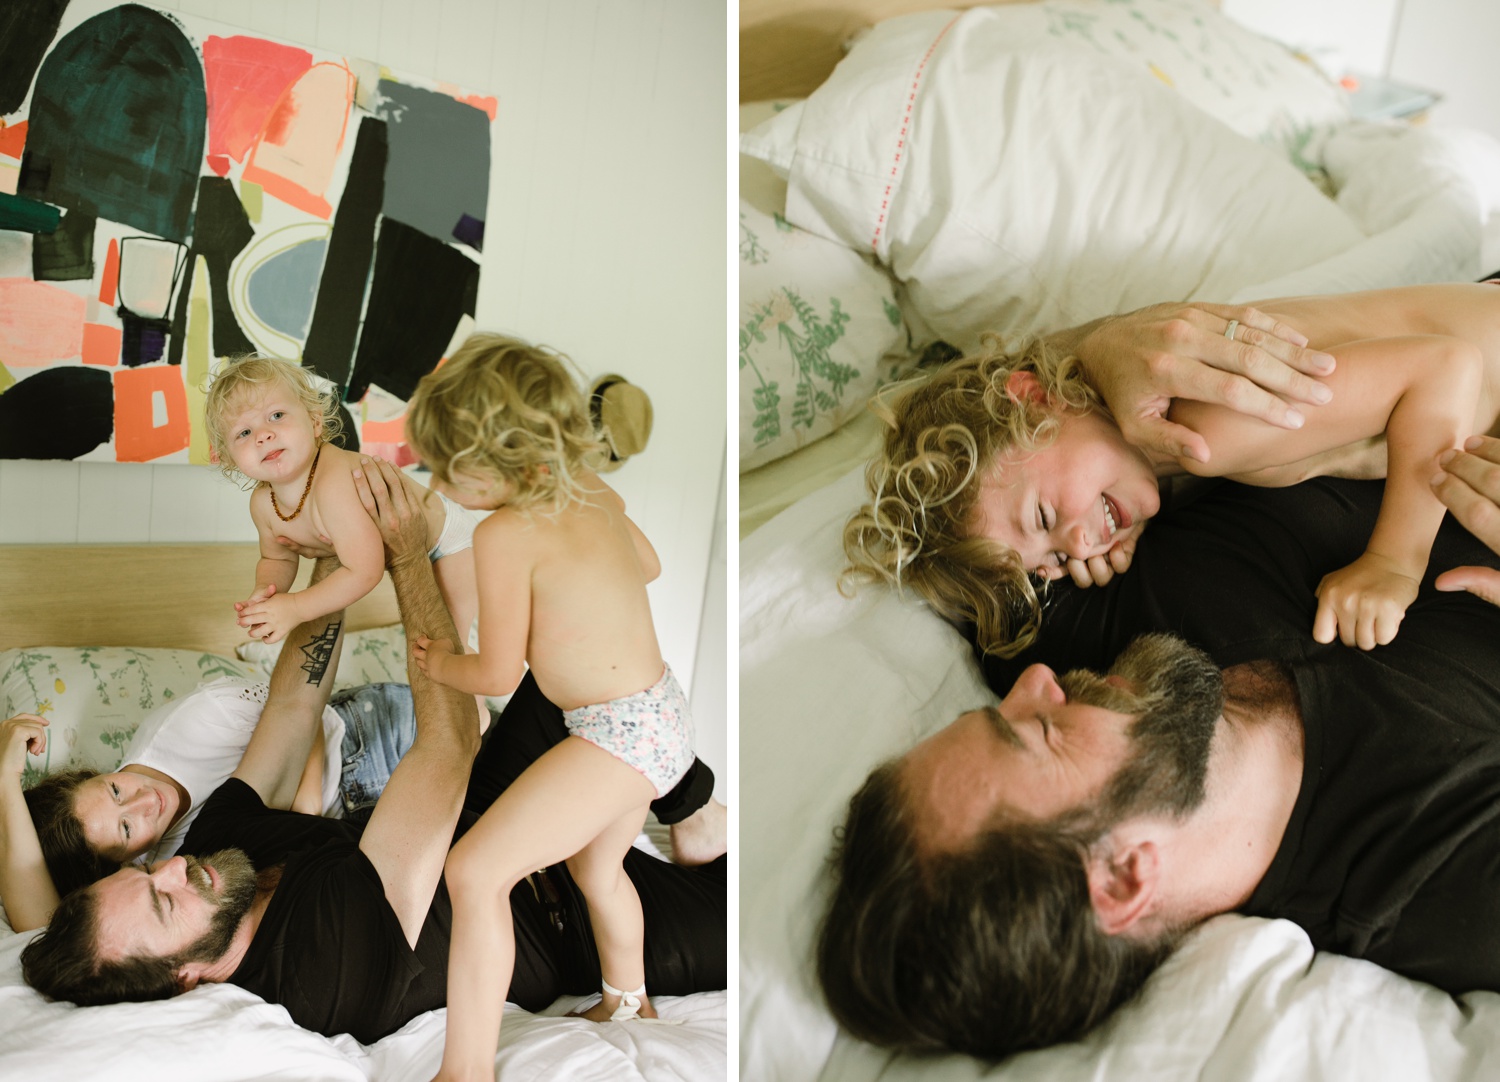 Family portraits on a bed